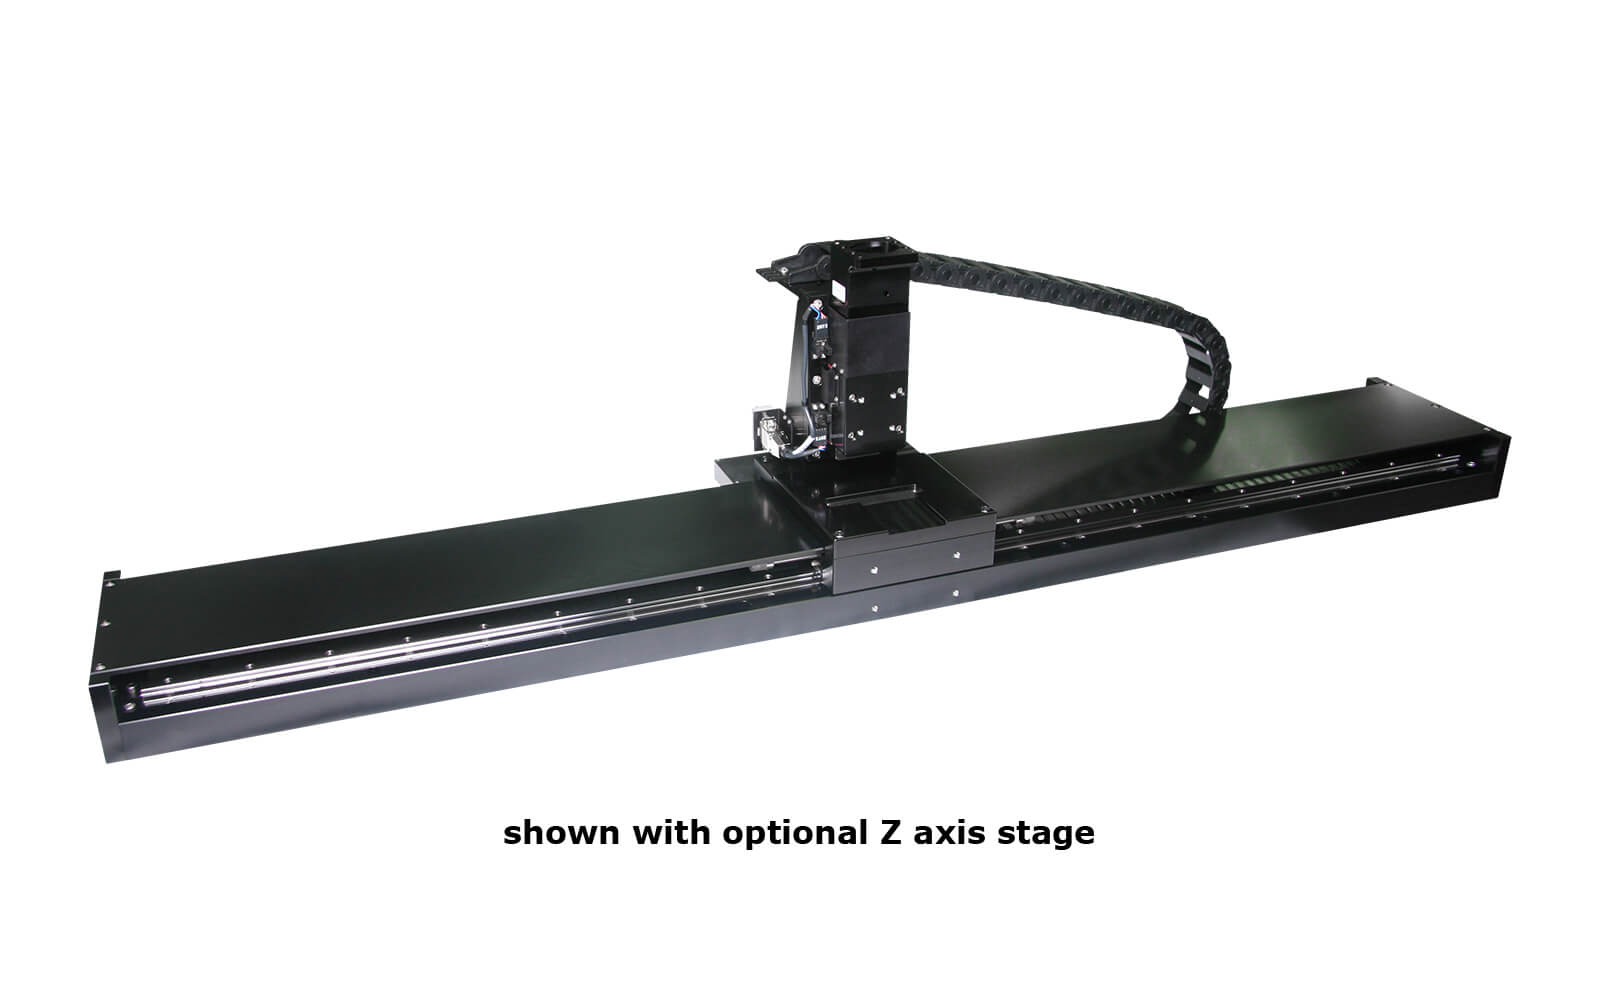 RSL1000X High-Speed Long Travel Stage with optional Z axis